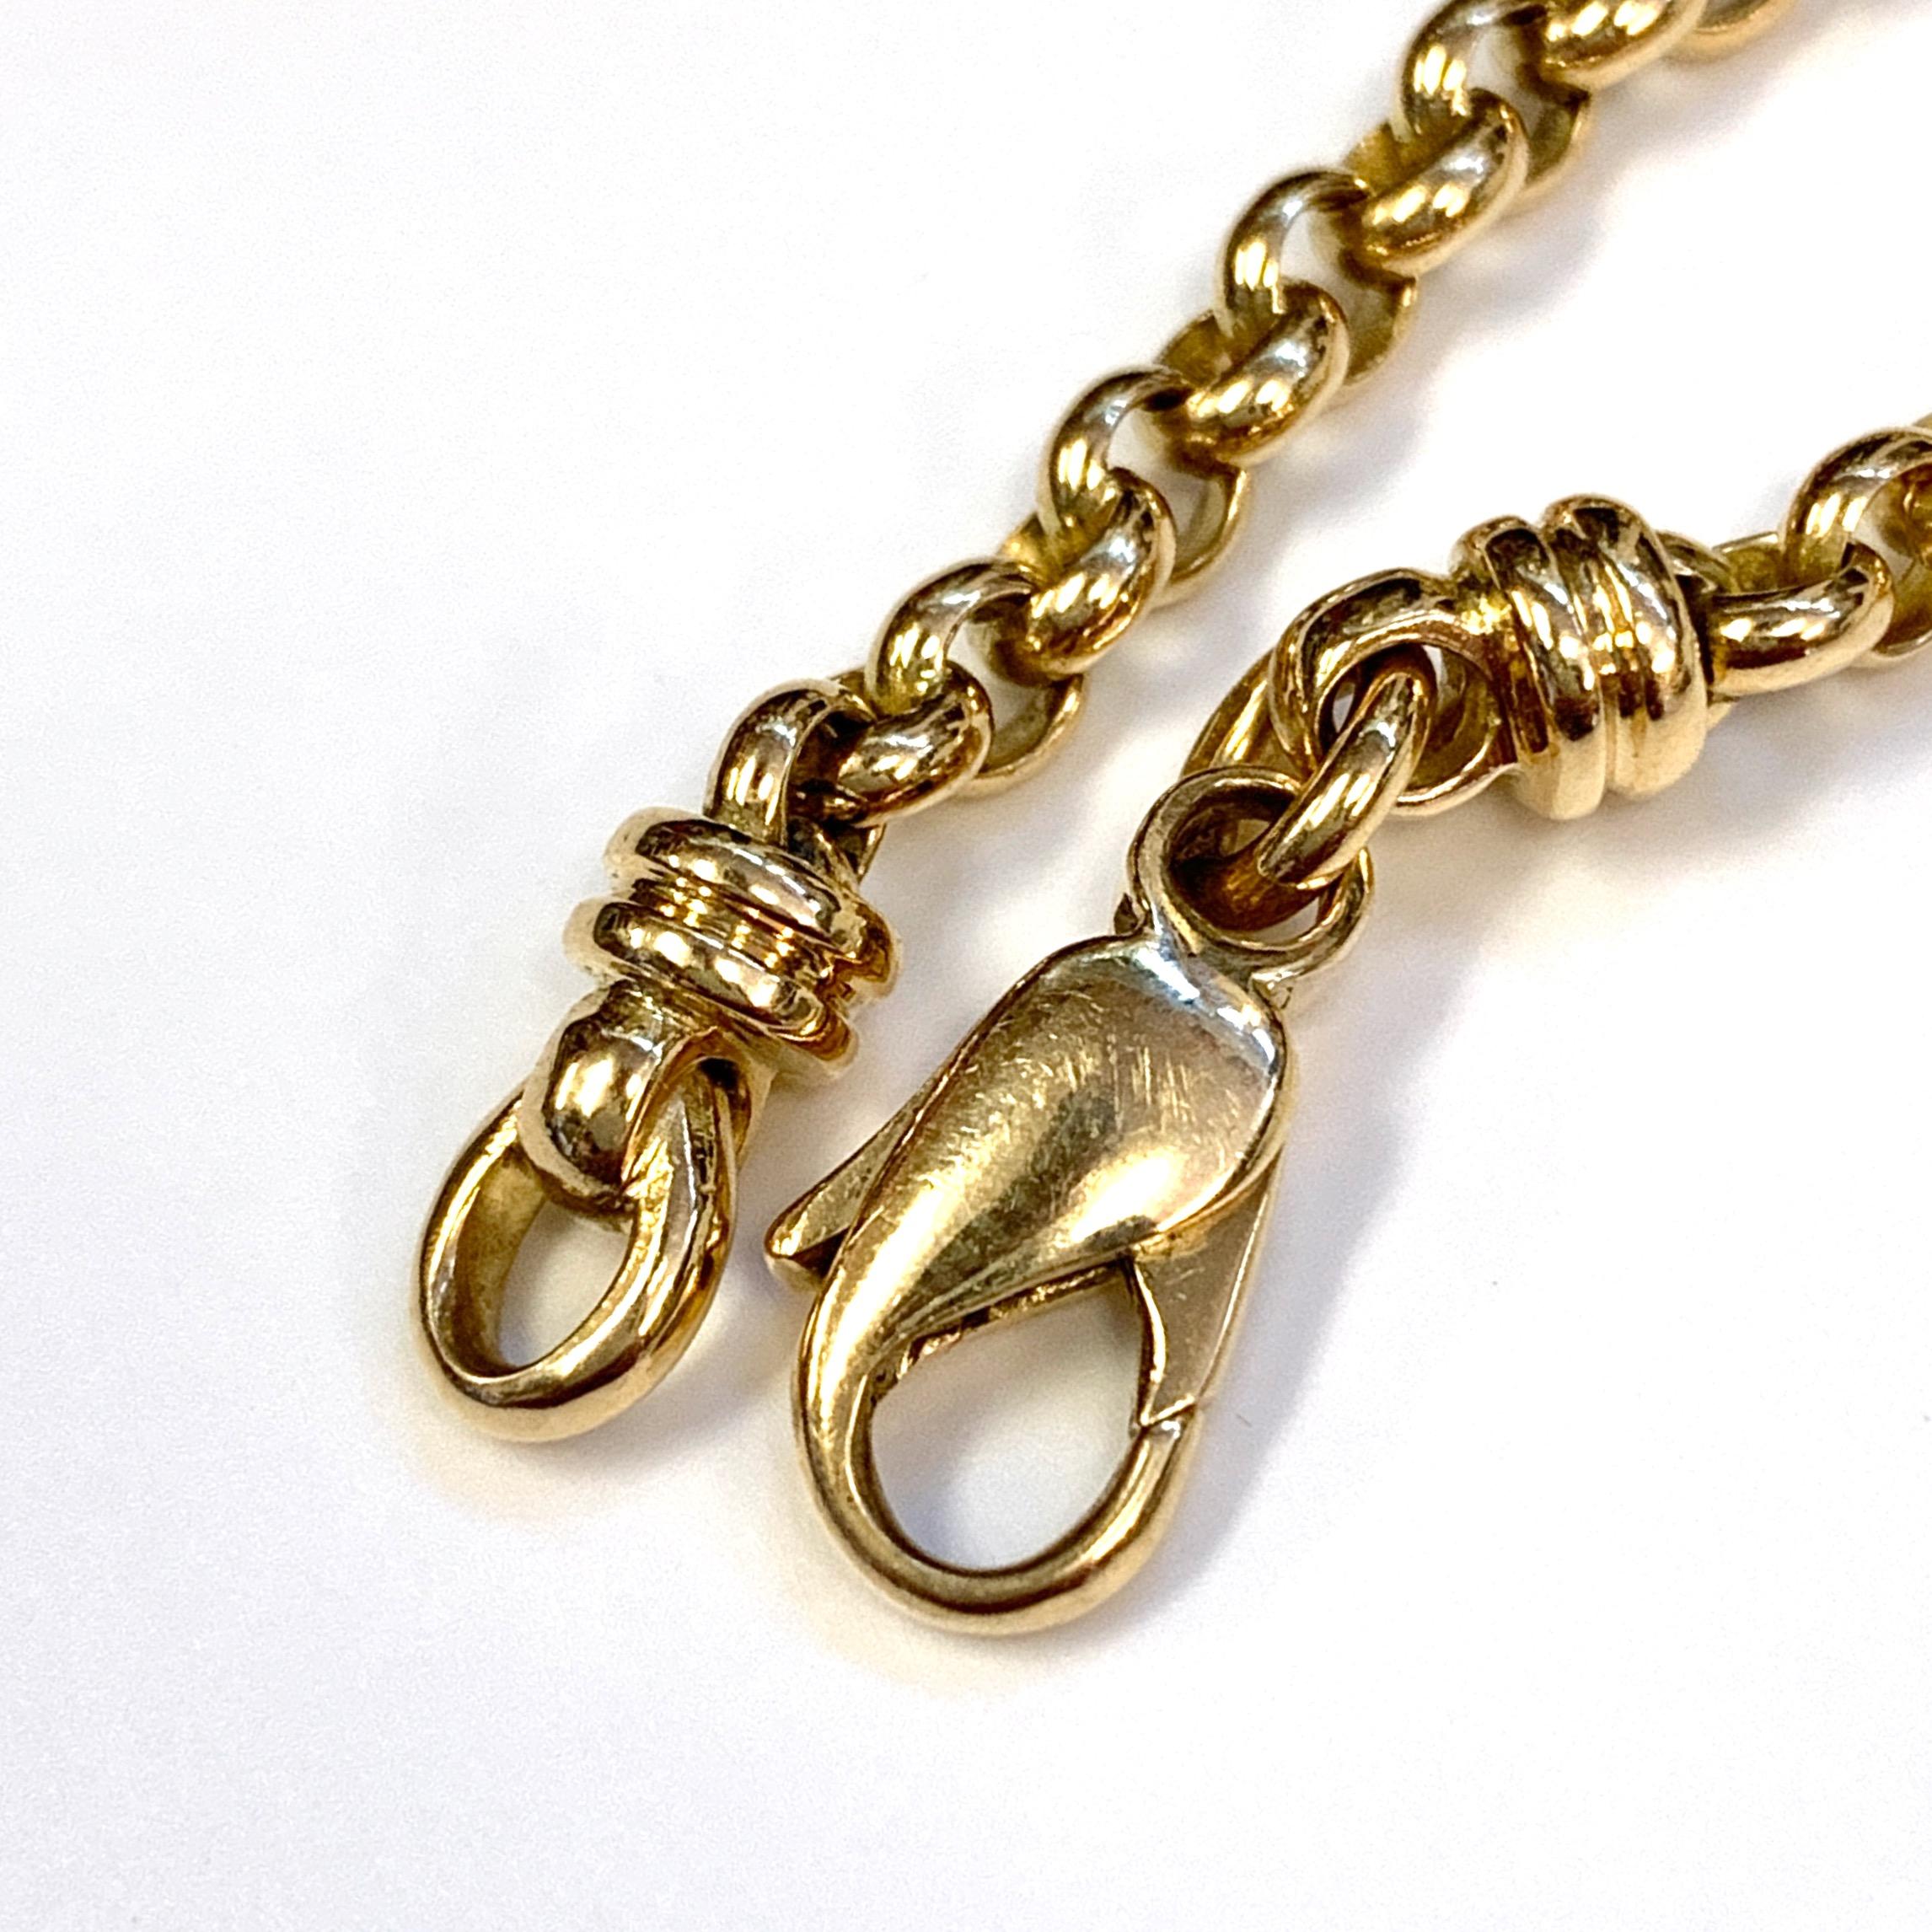 Contemporary Belcher-Style Rolo Chain Bracelet with Lobster Clasp in 18 Karat Yellow Gold